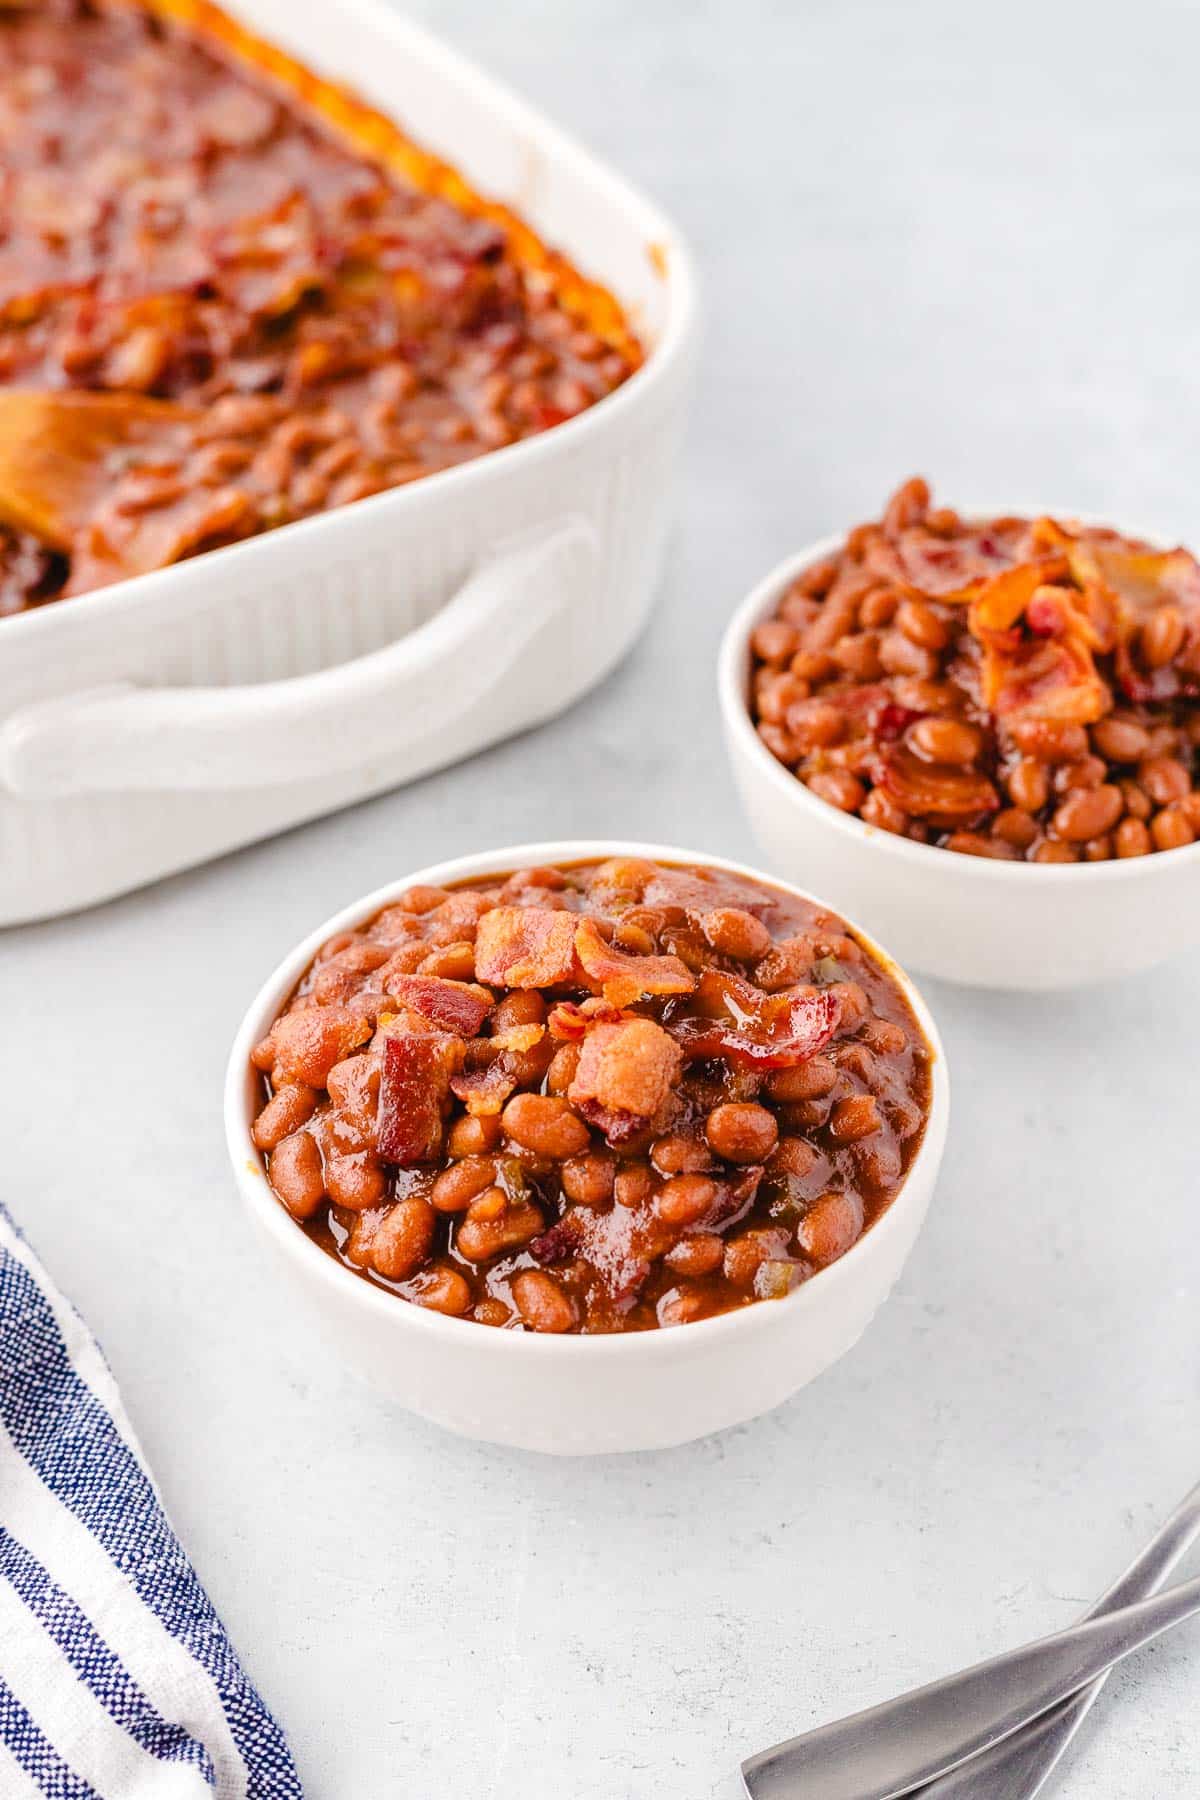 Two bowls of baked beans with casserole serving dish in background.